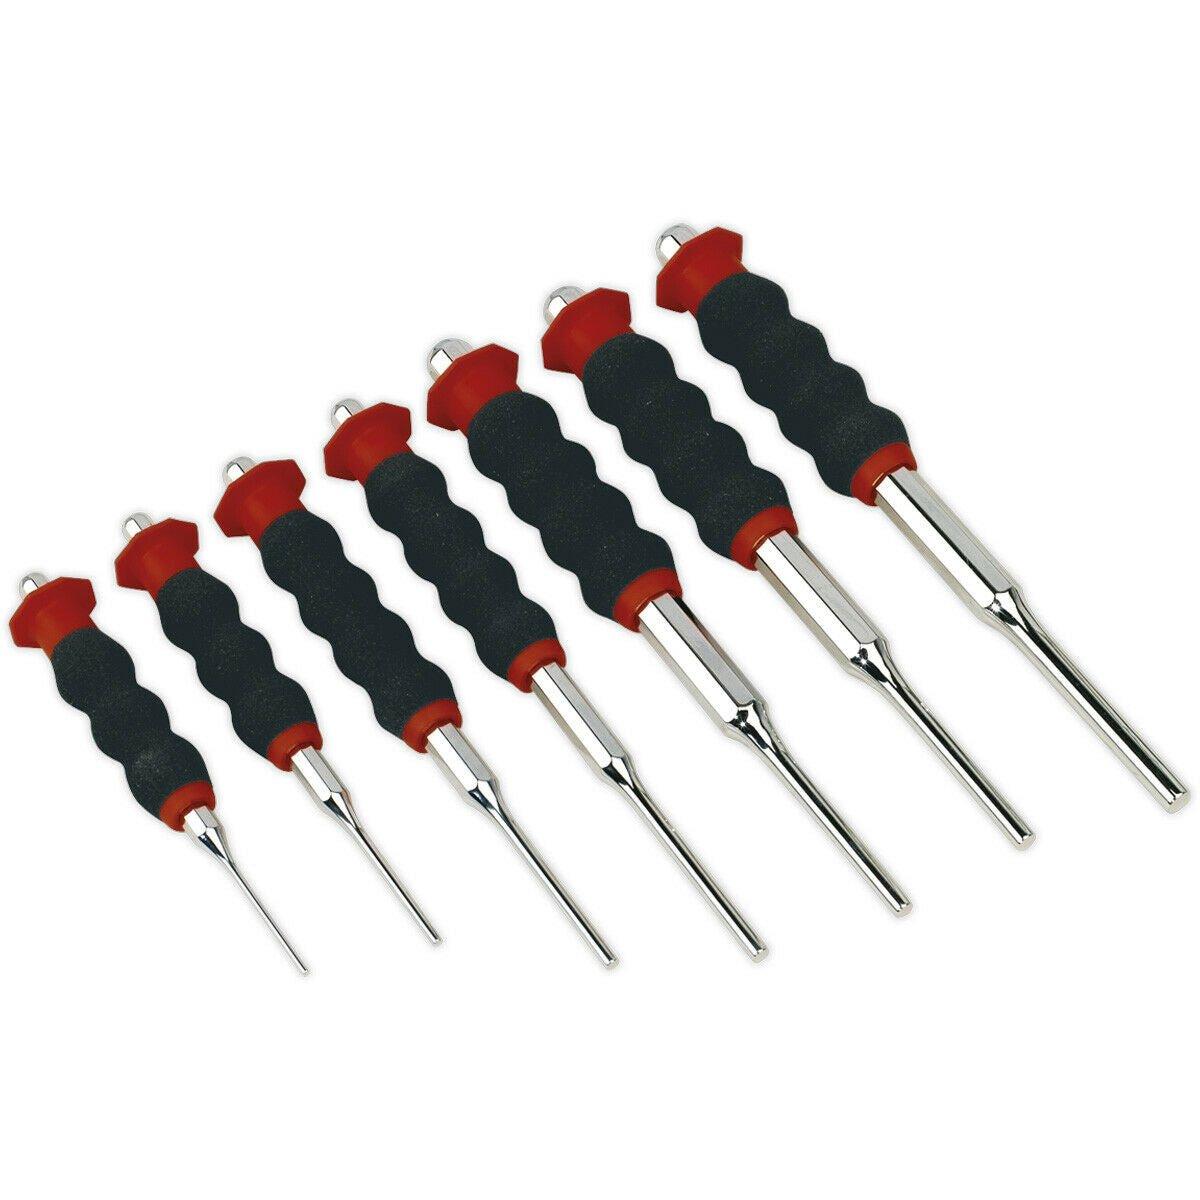 7 Piece Sheathed Parallel Pin Punch Set - Contoured Foam Grip - Chromoly Steel